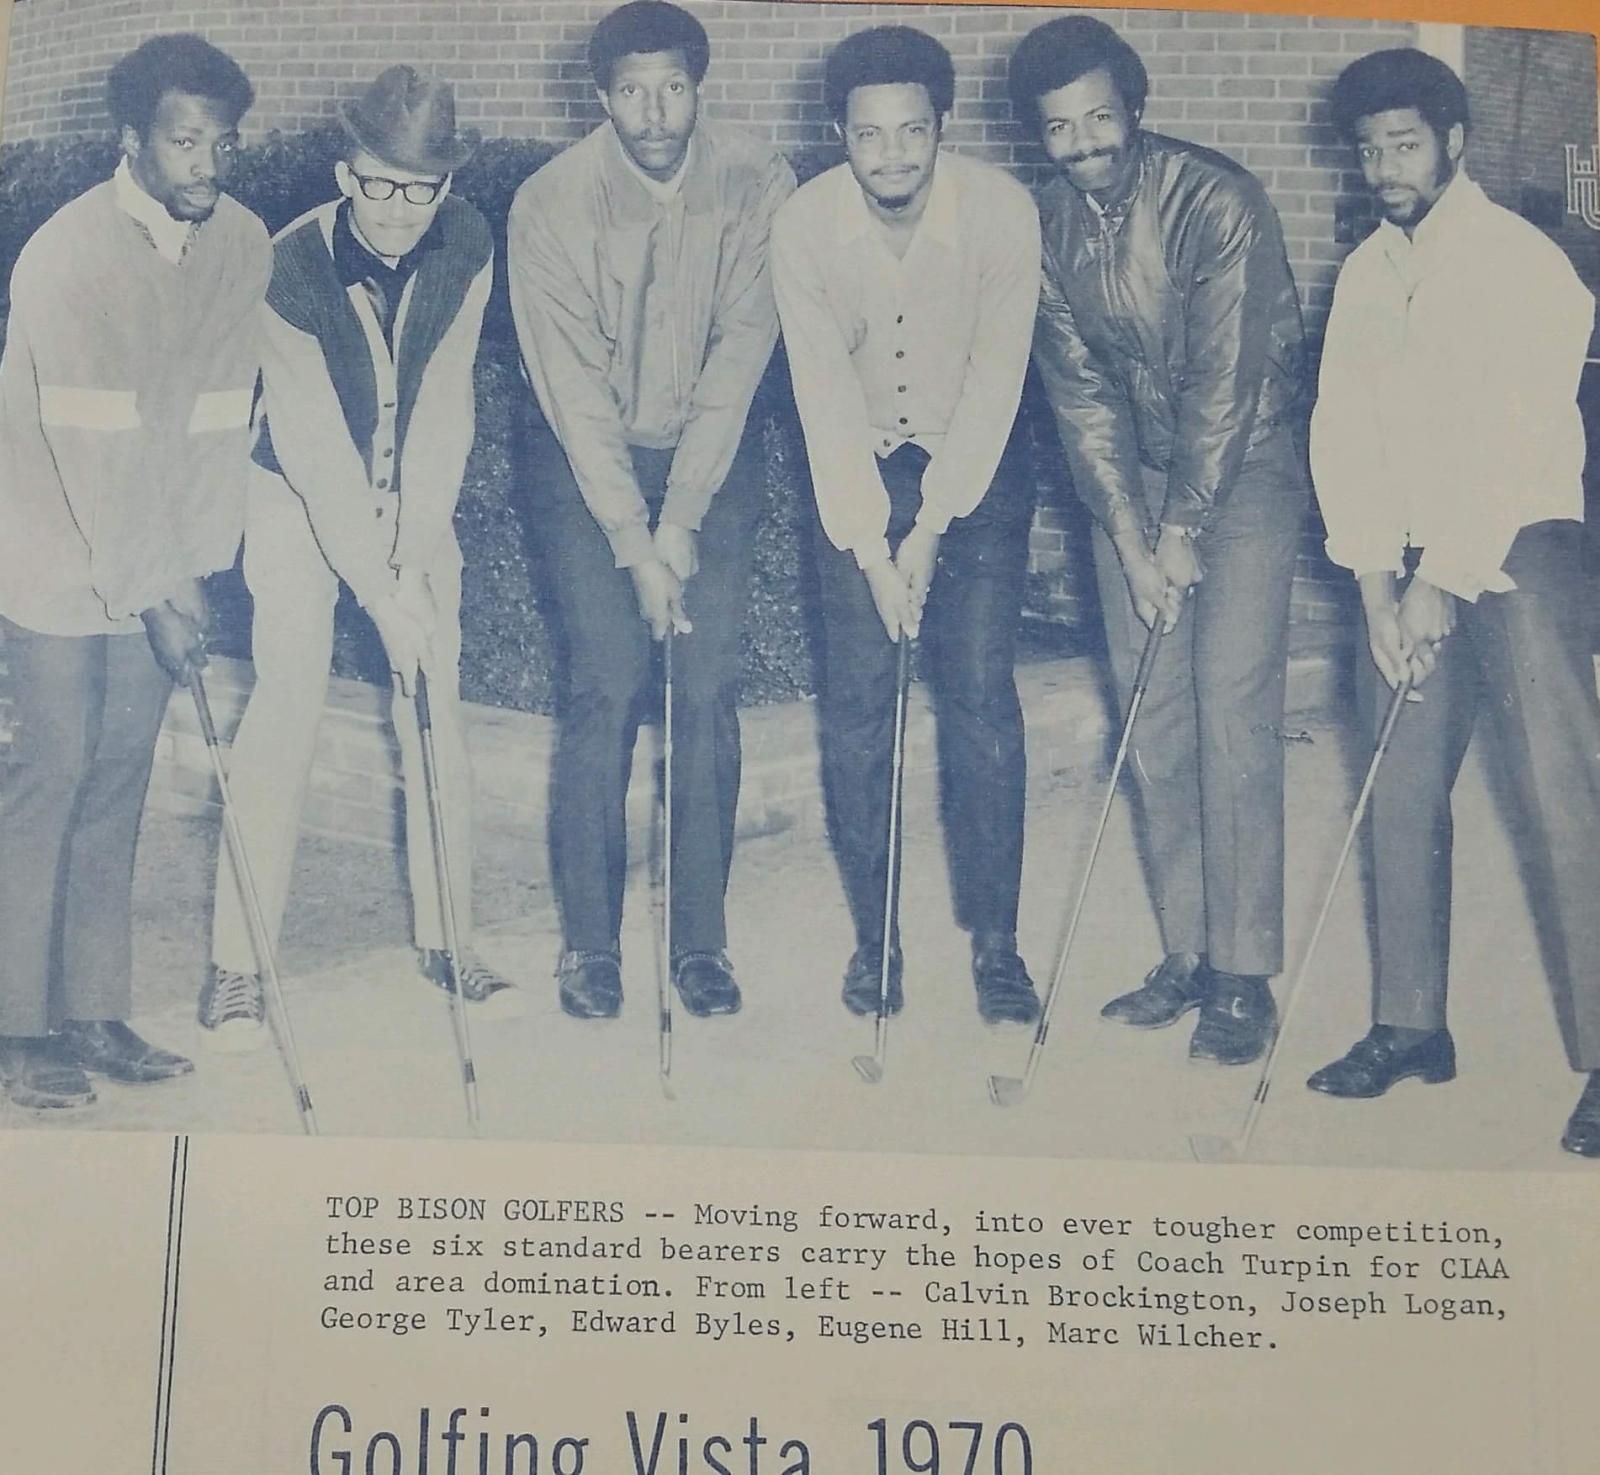 Newspaper clipping of Howard Golf team from 1970